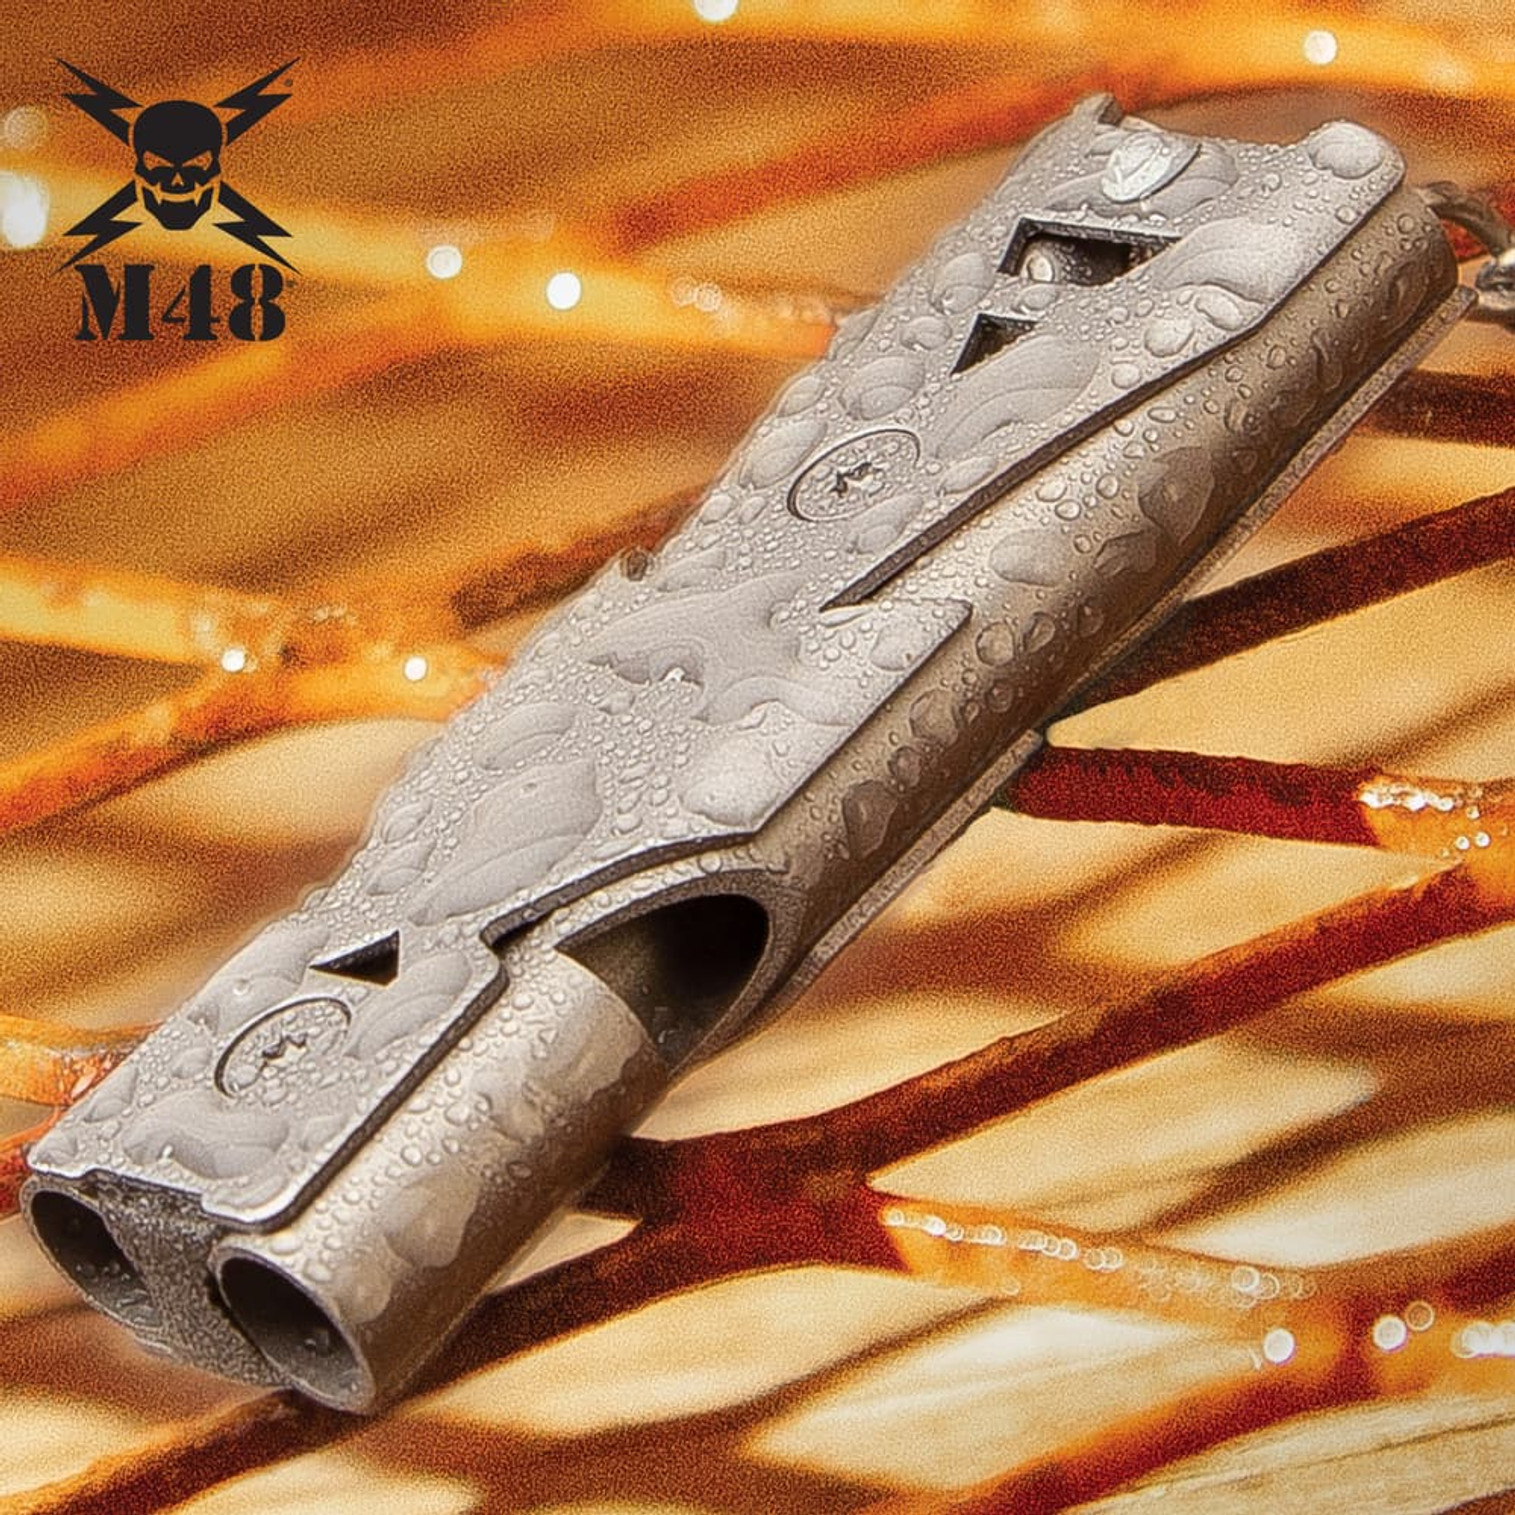 M48 Tactical Survival Whistle With Carabiner